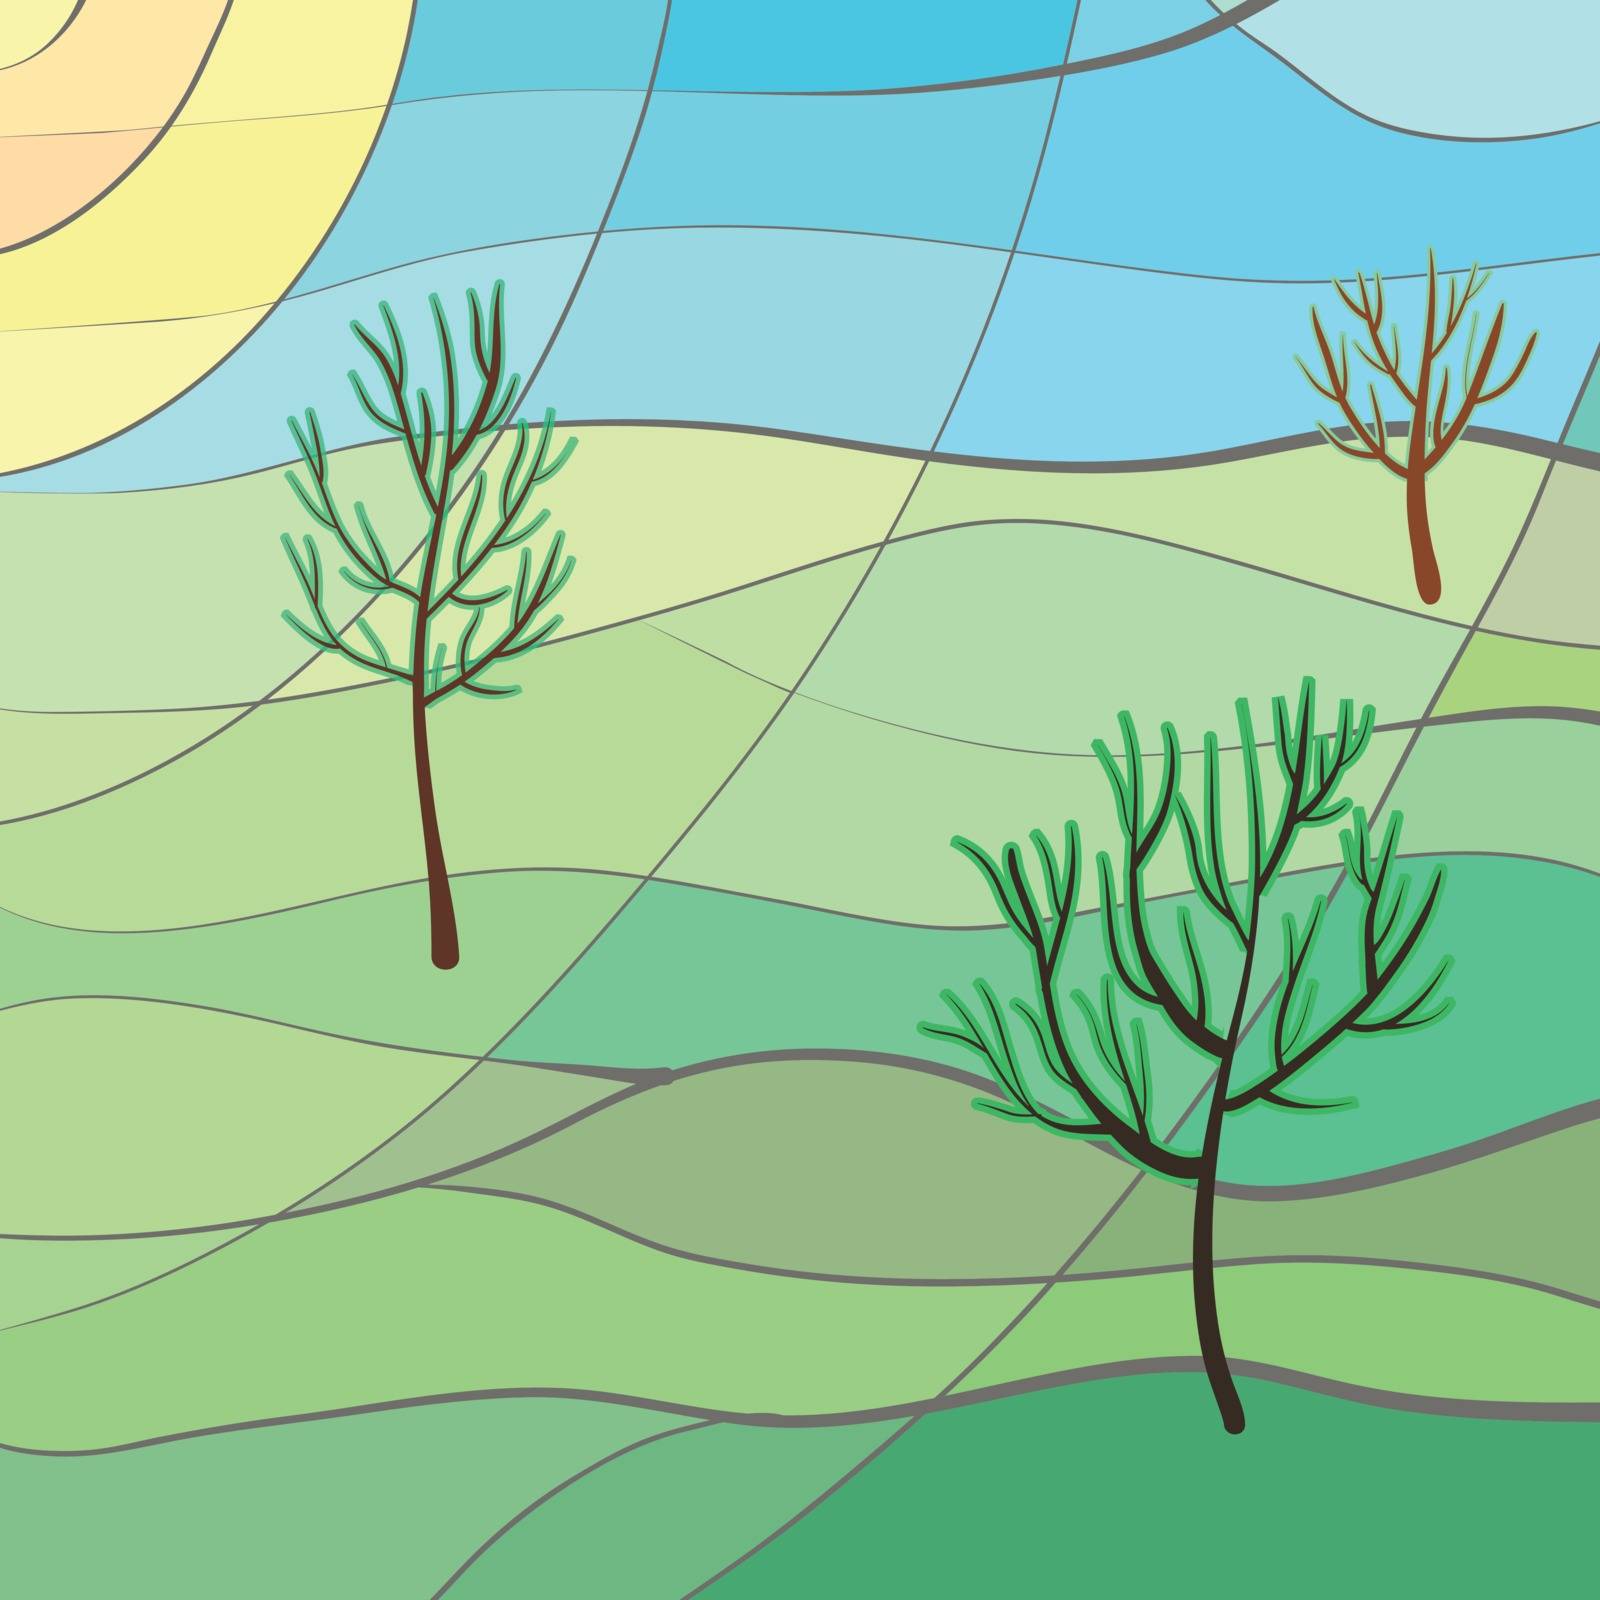 Spring landscape in stained glass window style